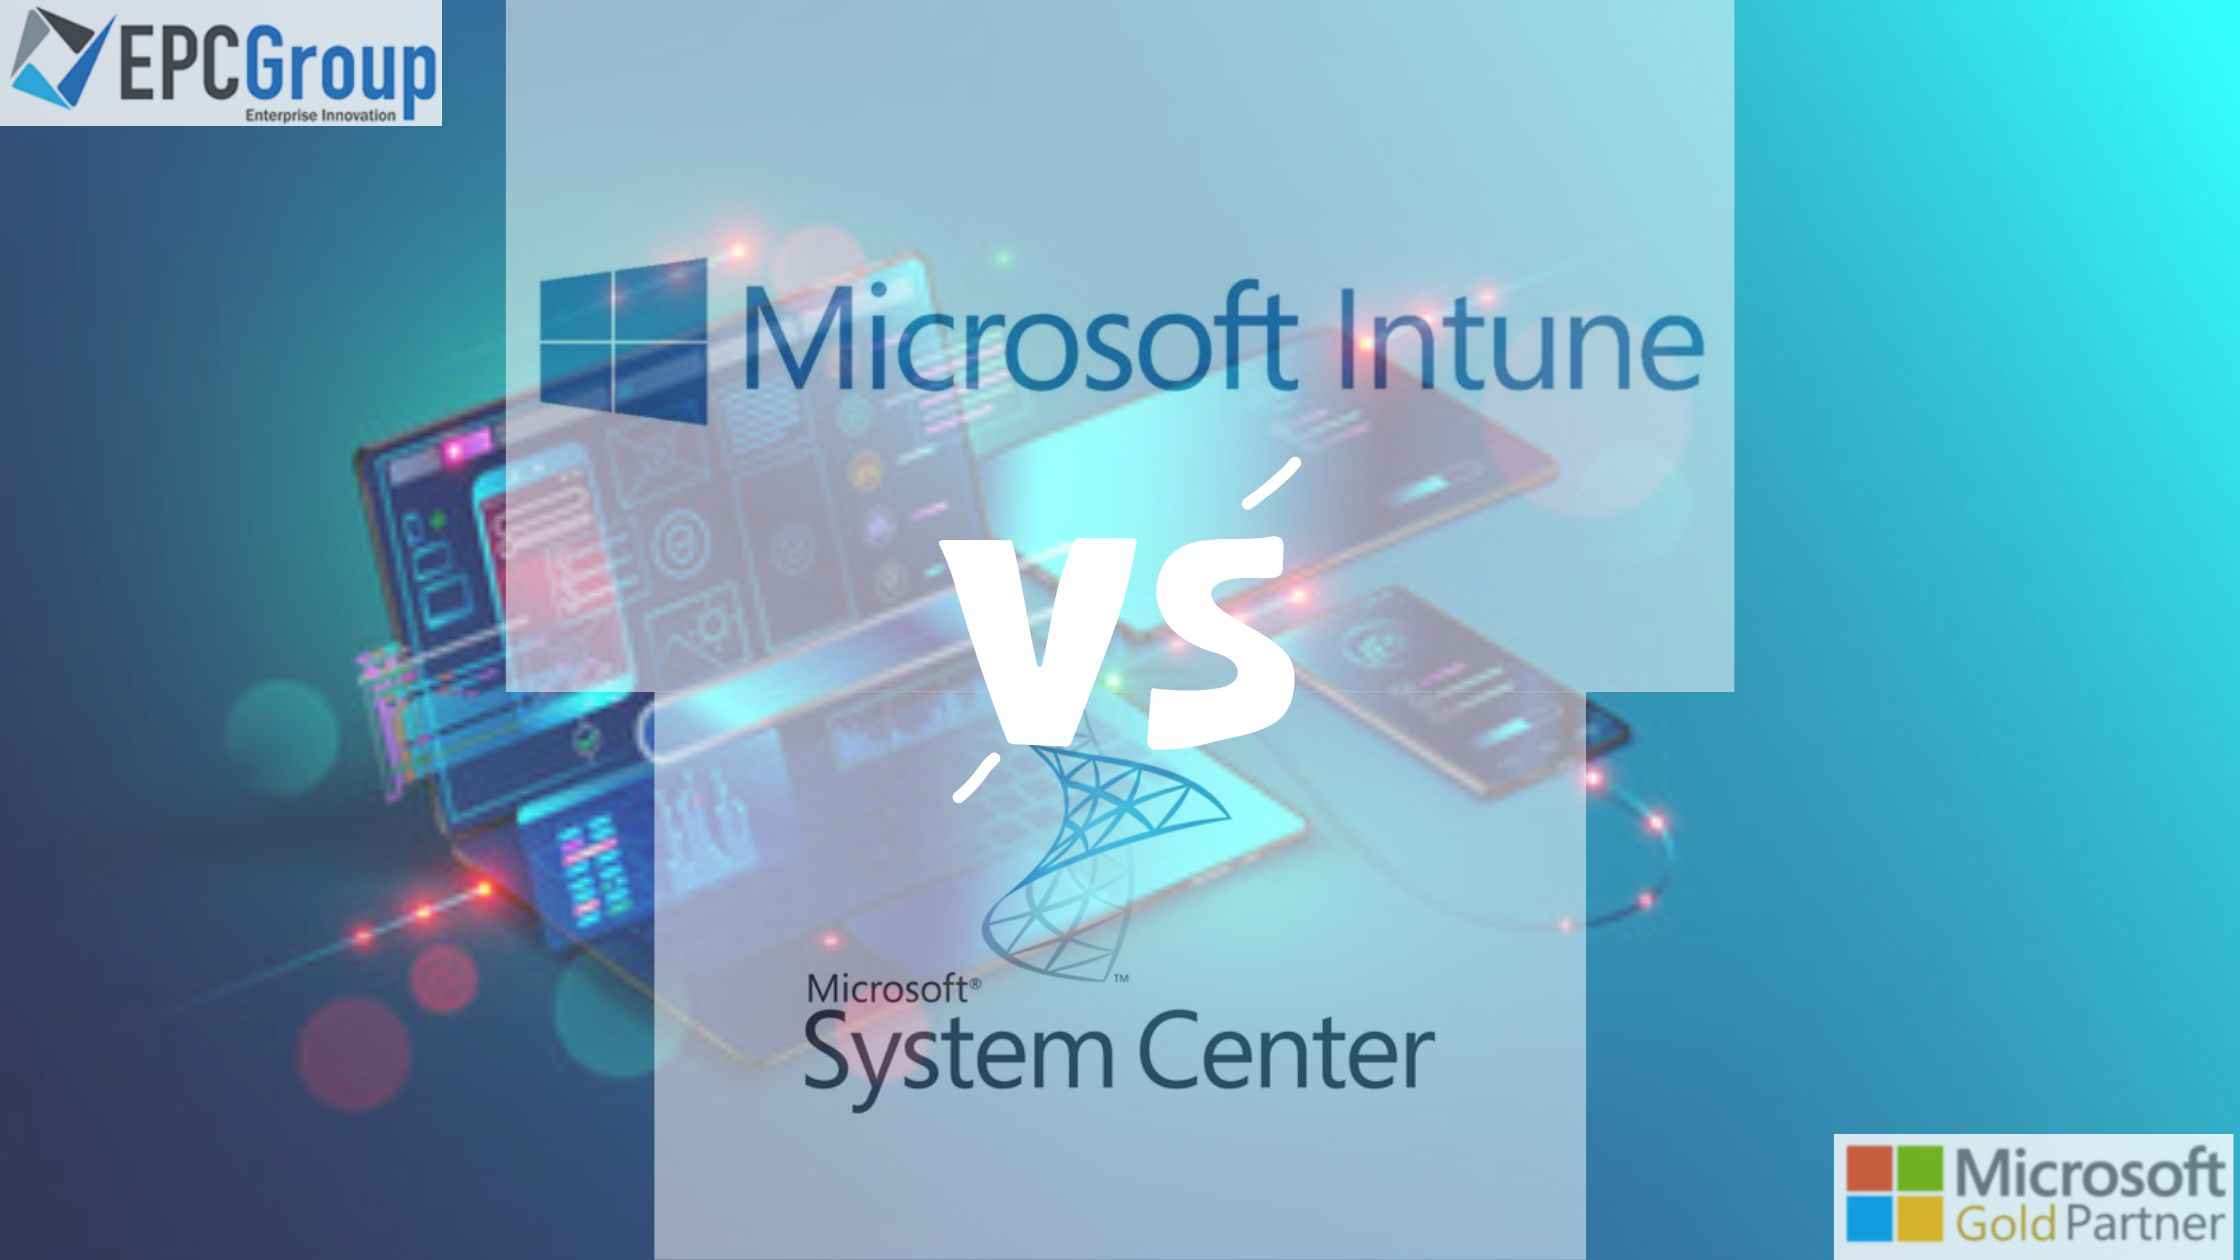 Microsoft Intune vs. SCCM solutions are parts of Microsoft Endpoint Manager - thumb image